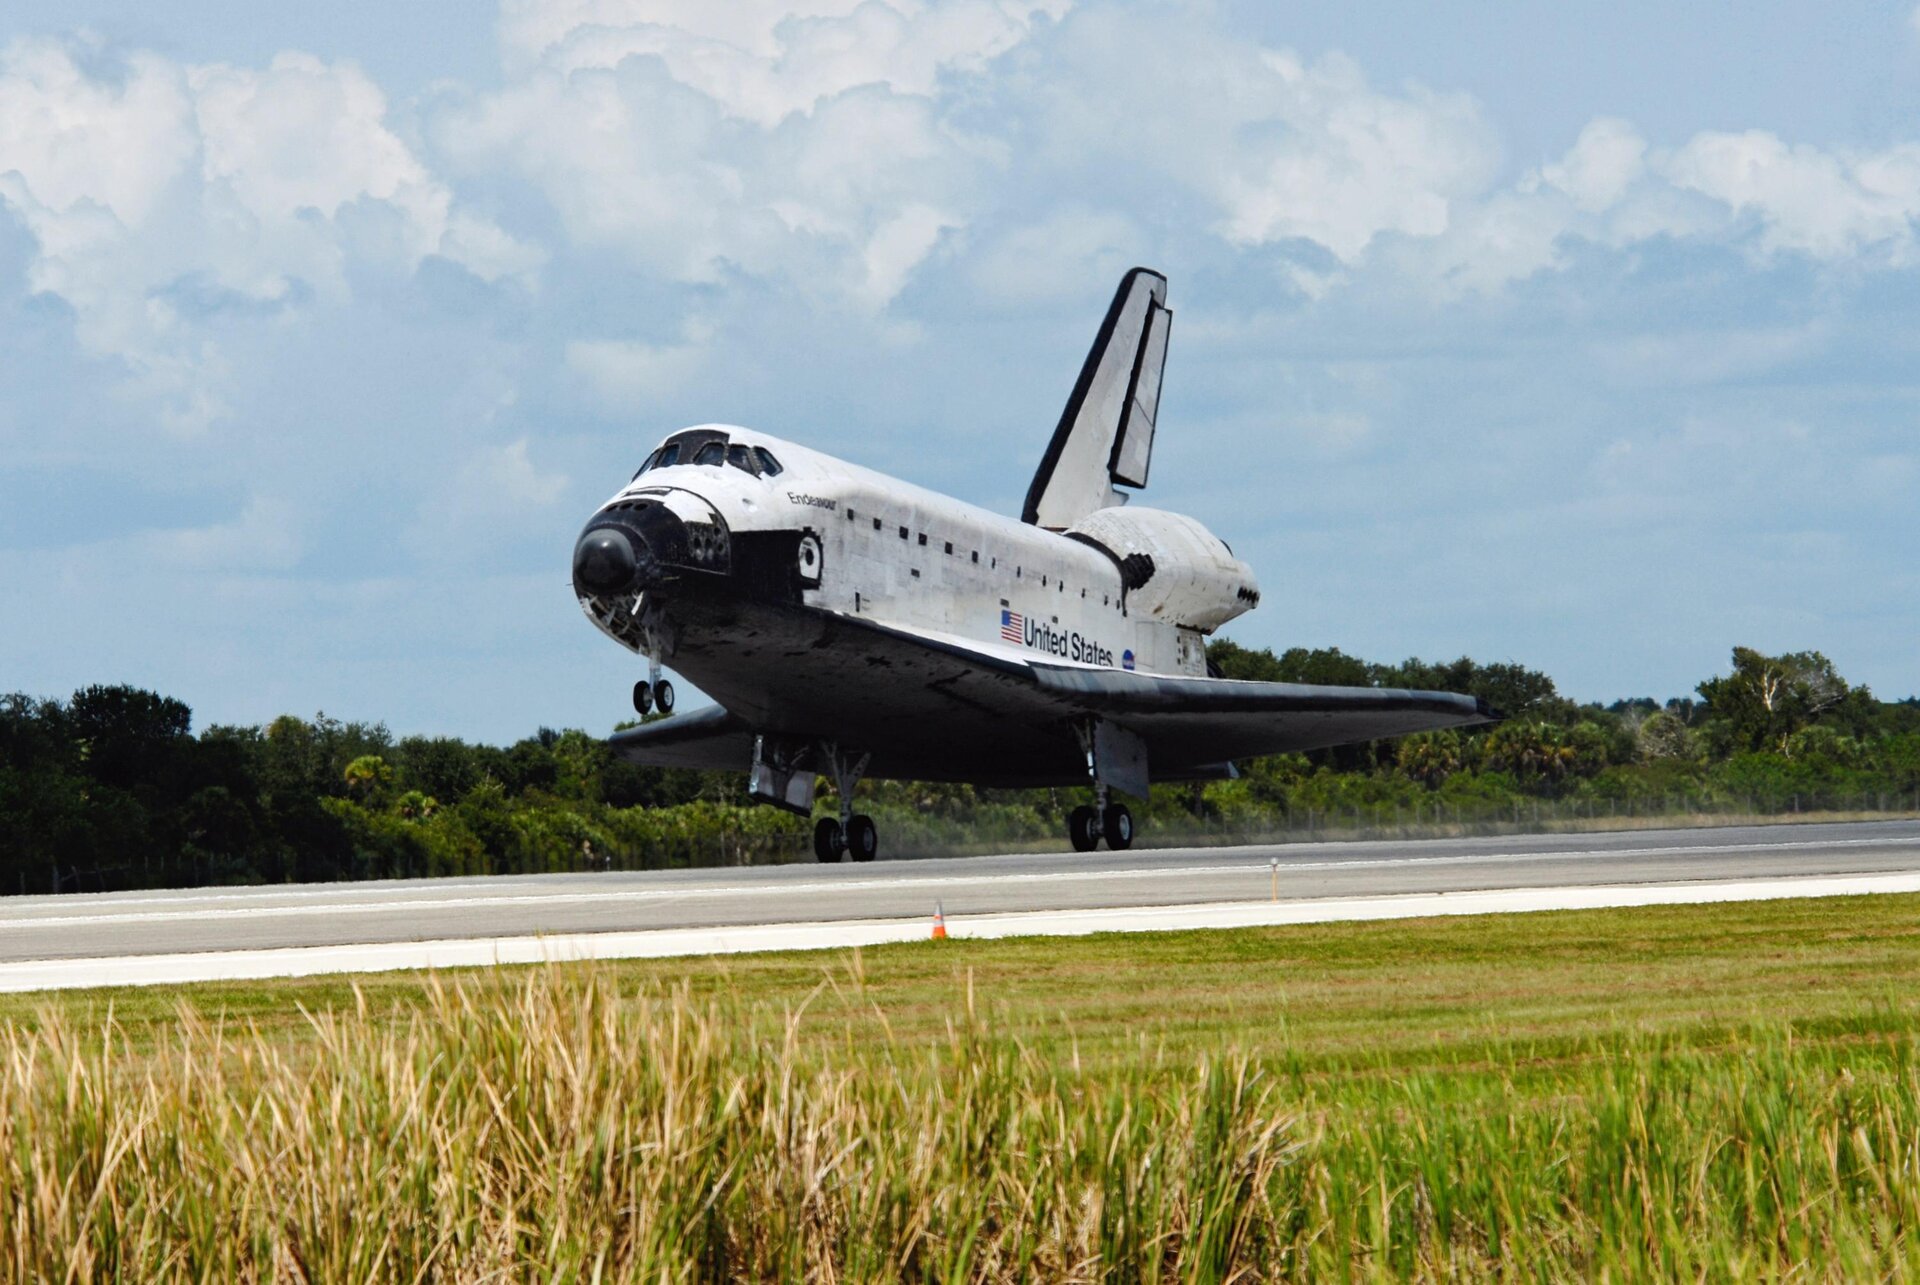 Endeavour successfully landed at KSC